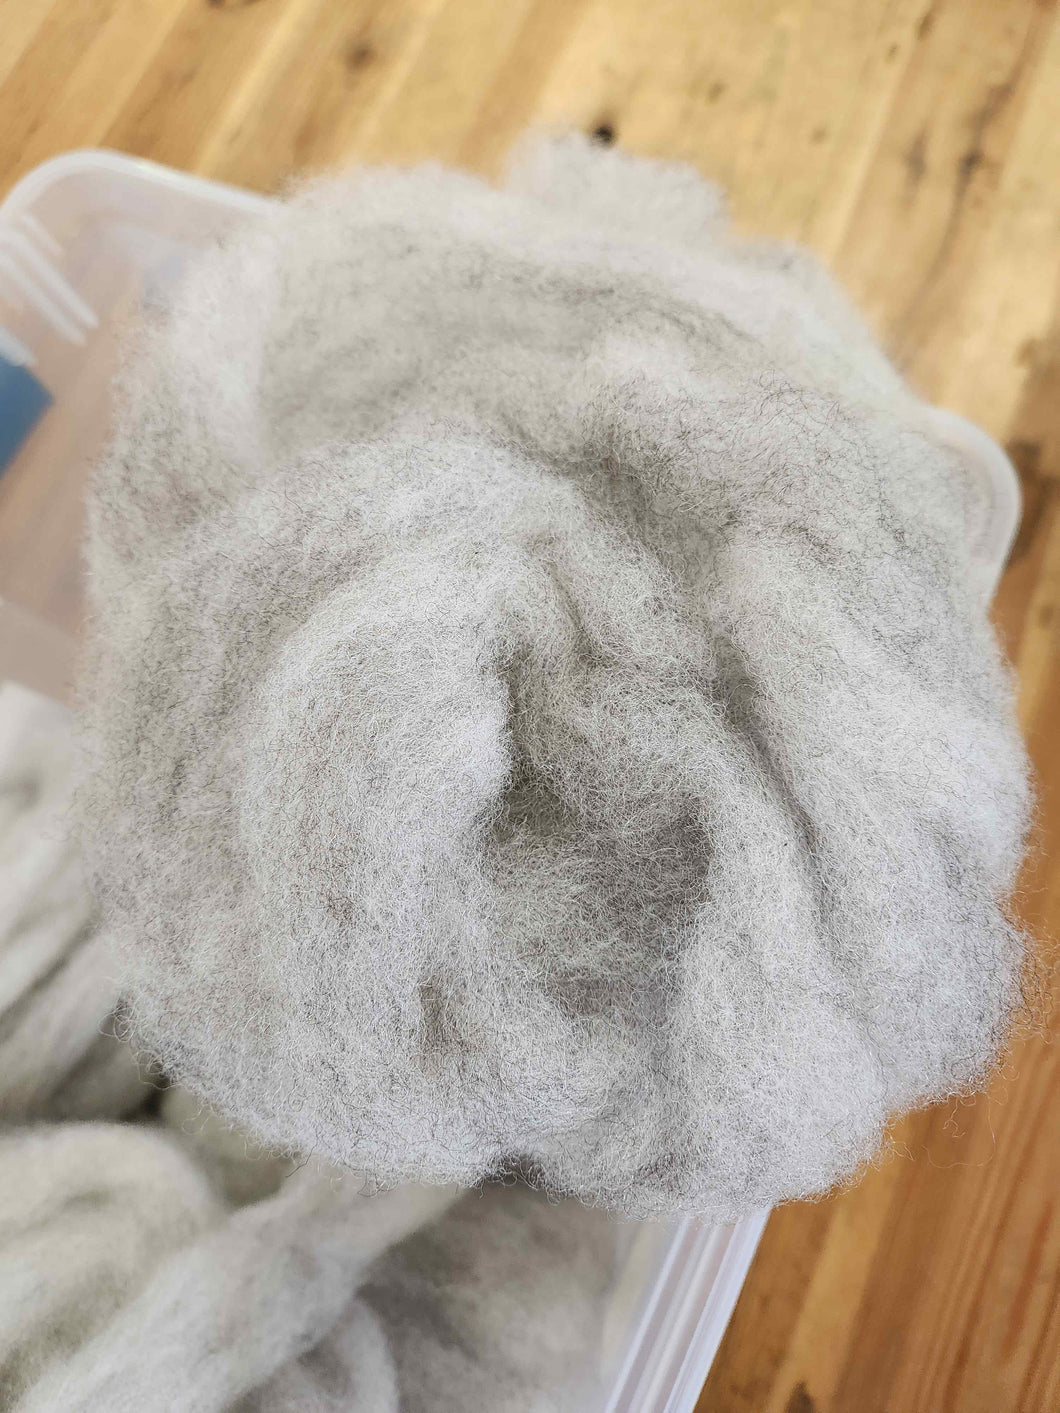 Romney Natural Colored White & Grays - Great for Beginners - 4oz